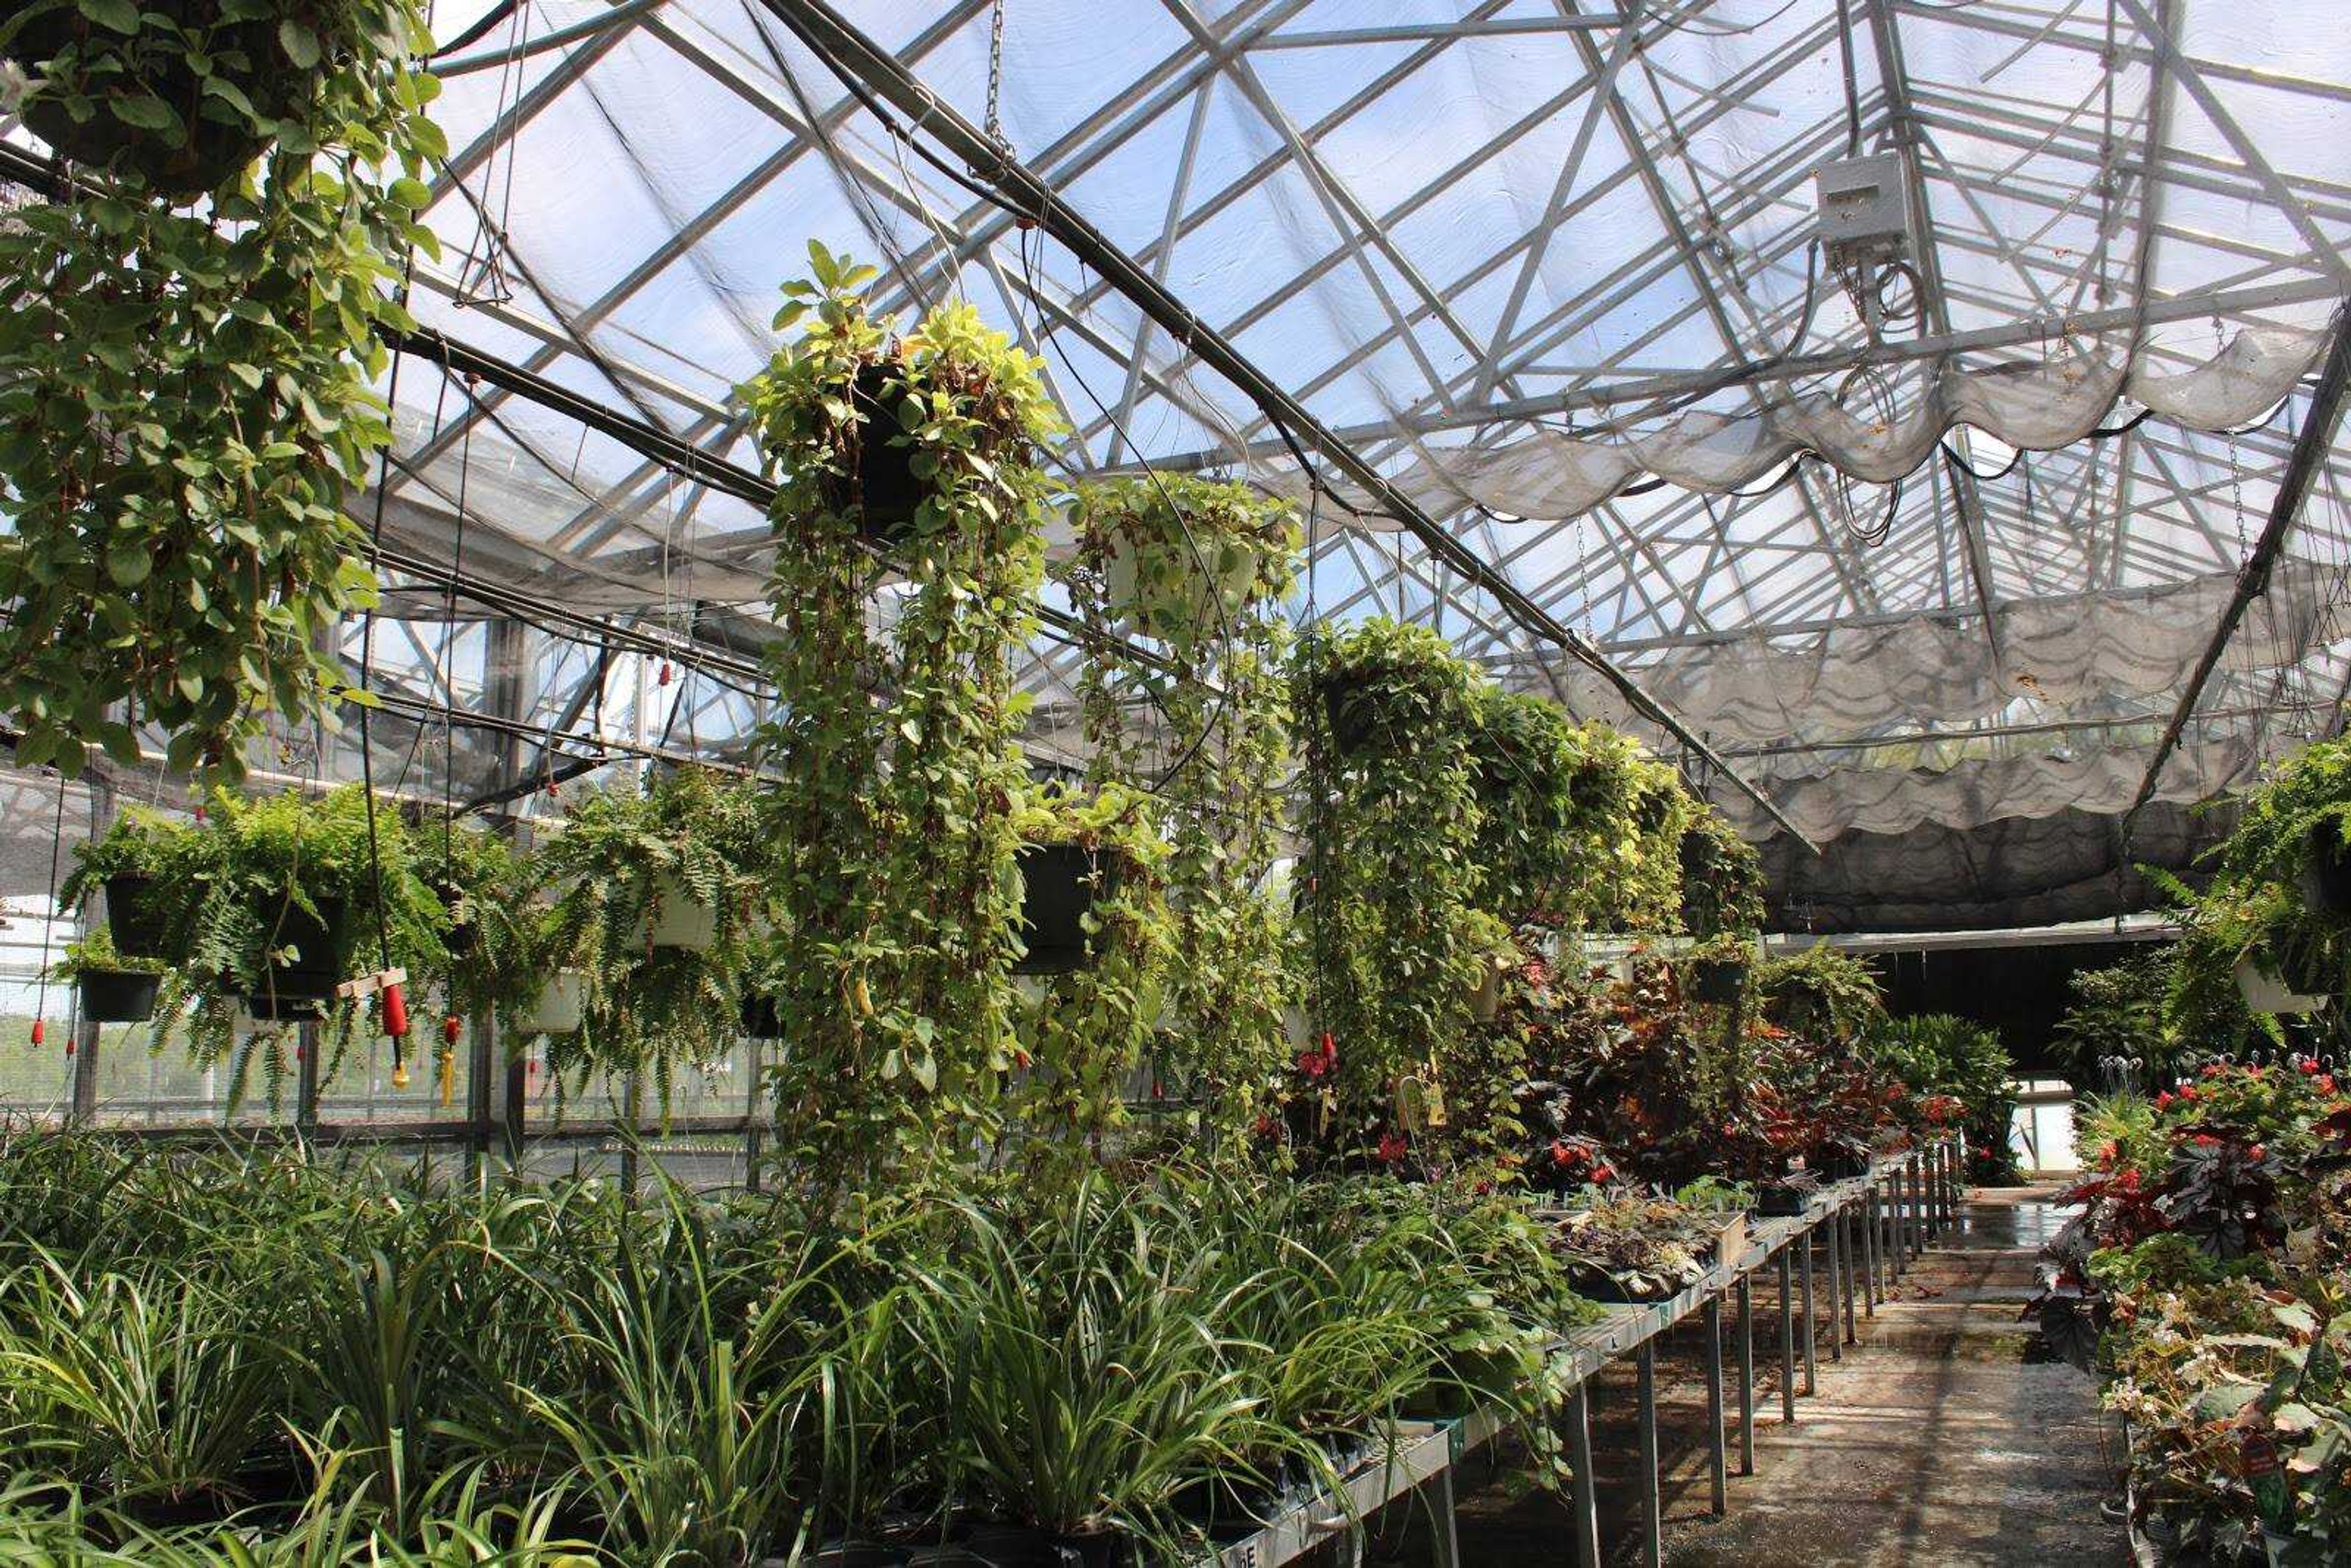 Indoor plants in the process of growing at the Charles Hutson Horticulture Greenhouse in Cape Girardeau on May 1, 2020.